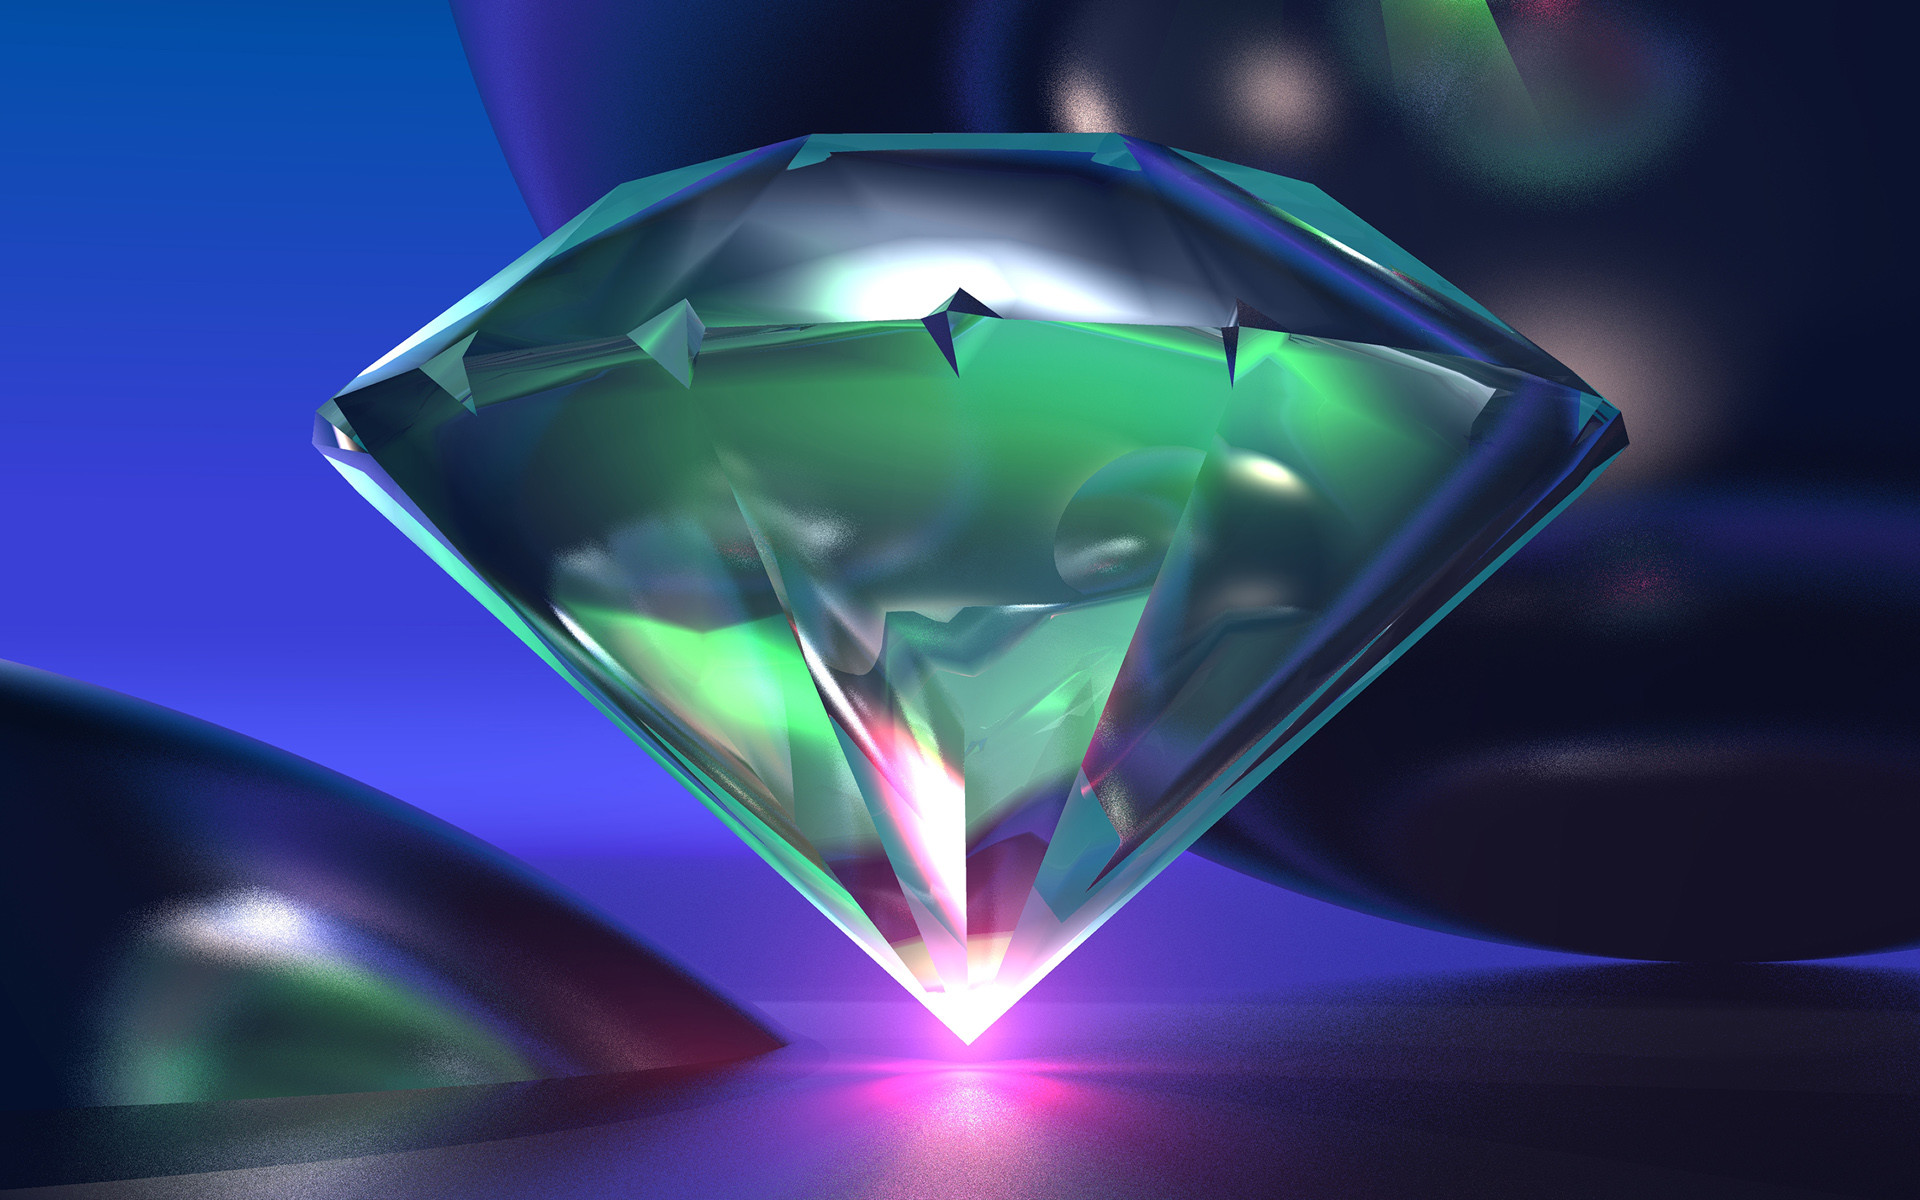 1920x1200 Diamond backgrounds images pictures.